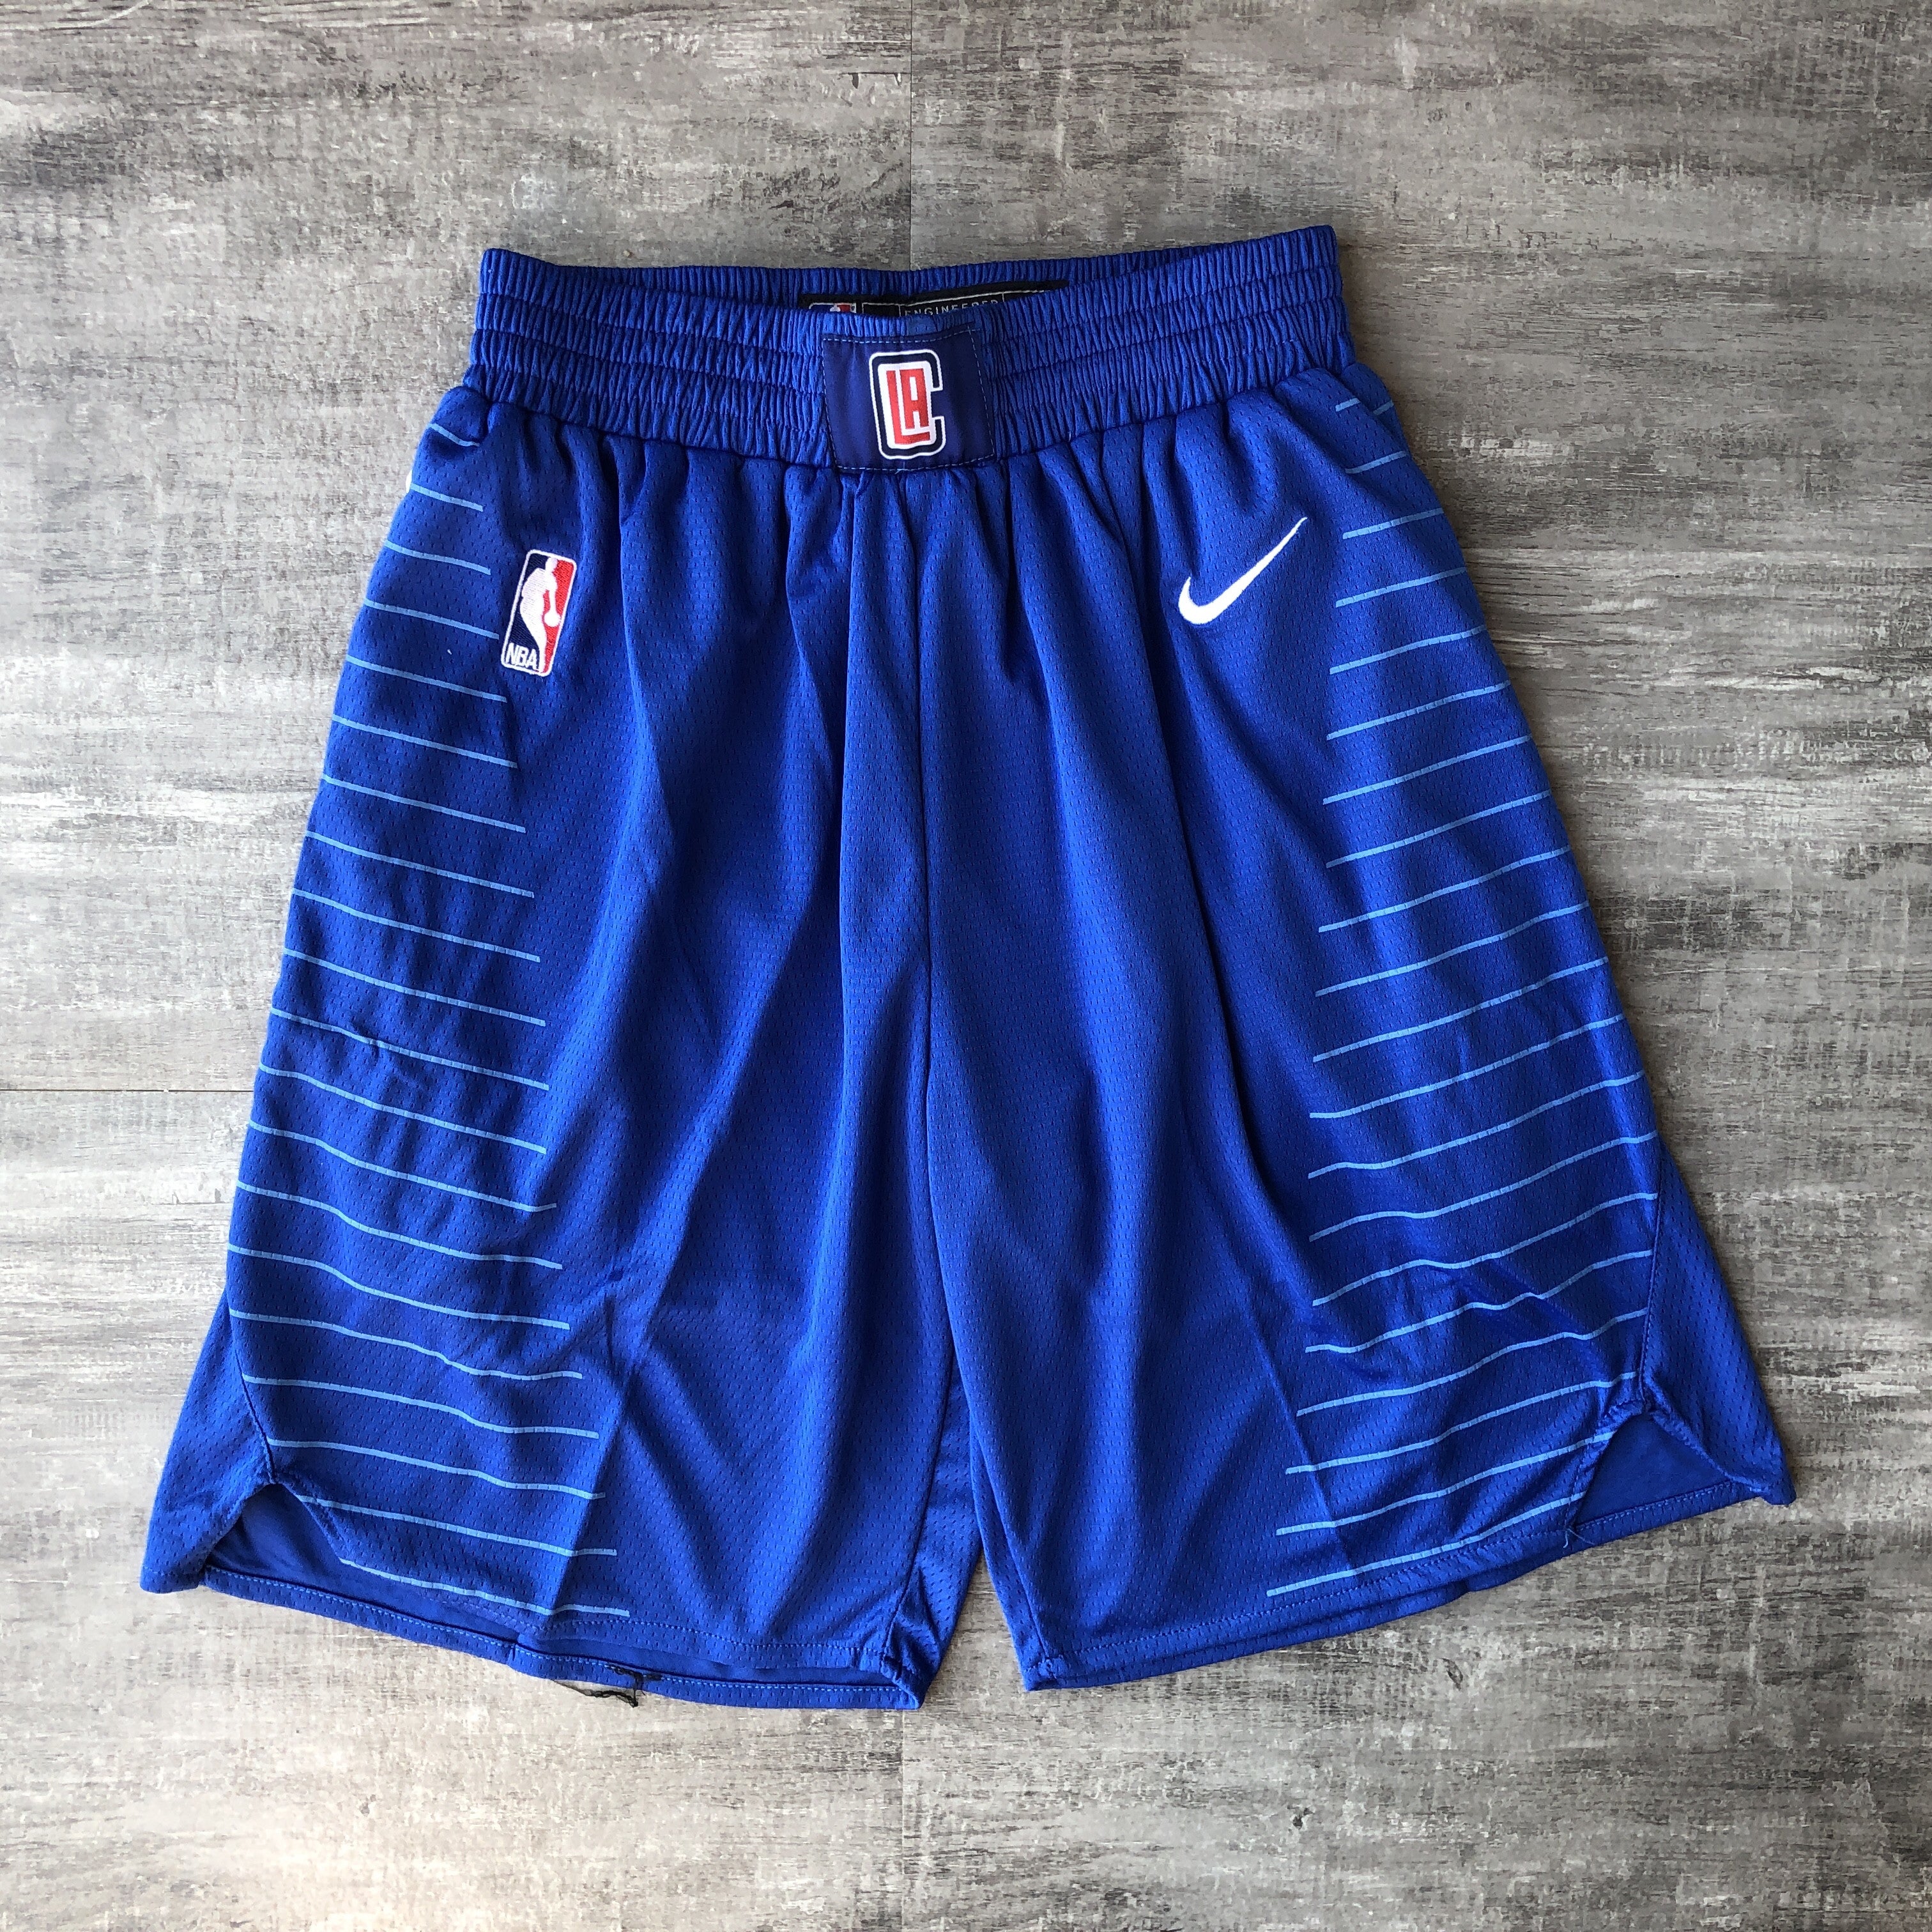 Clippers royal blue shorts